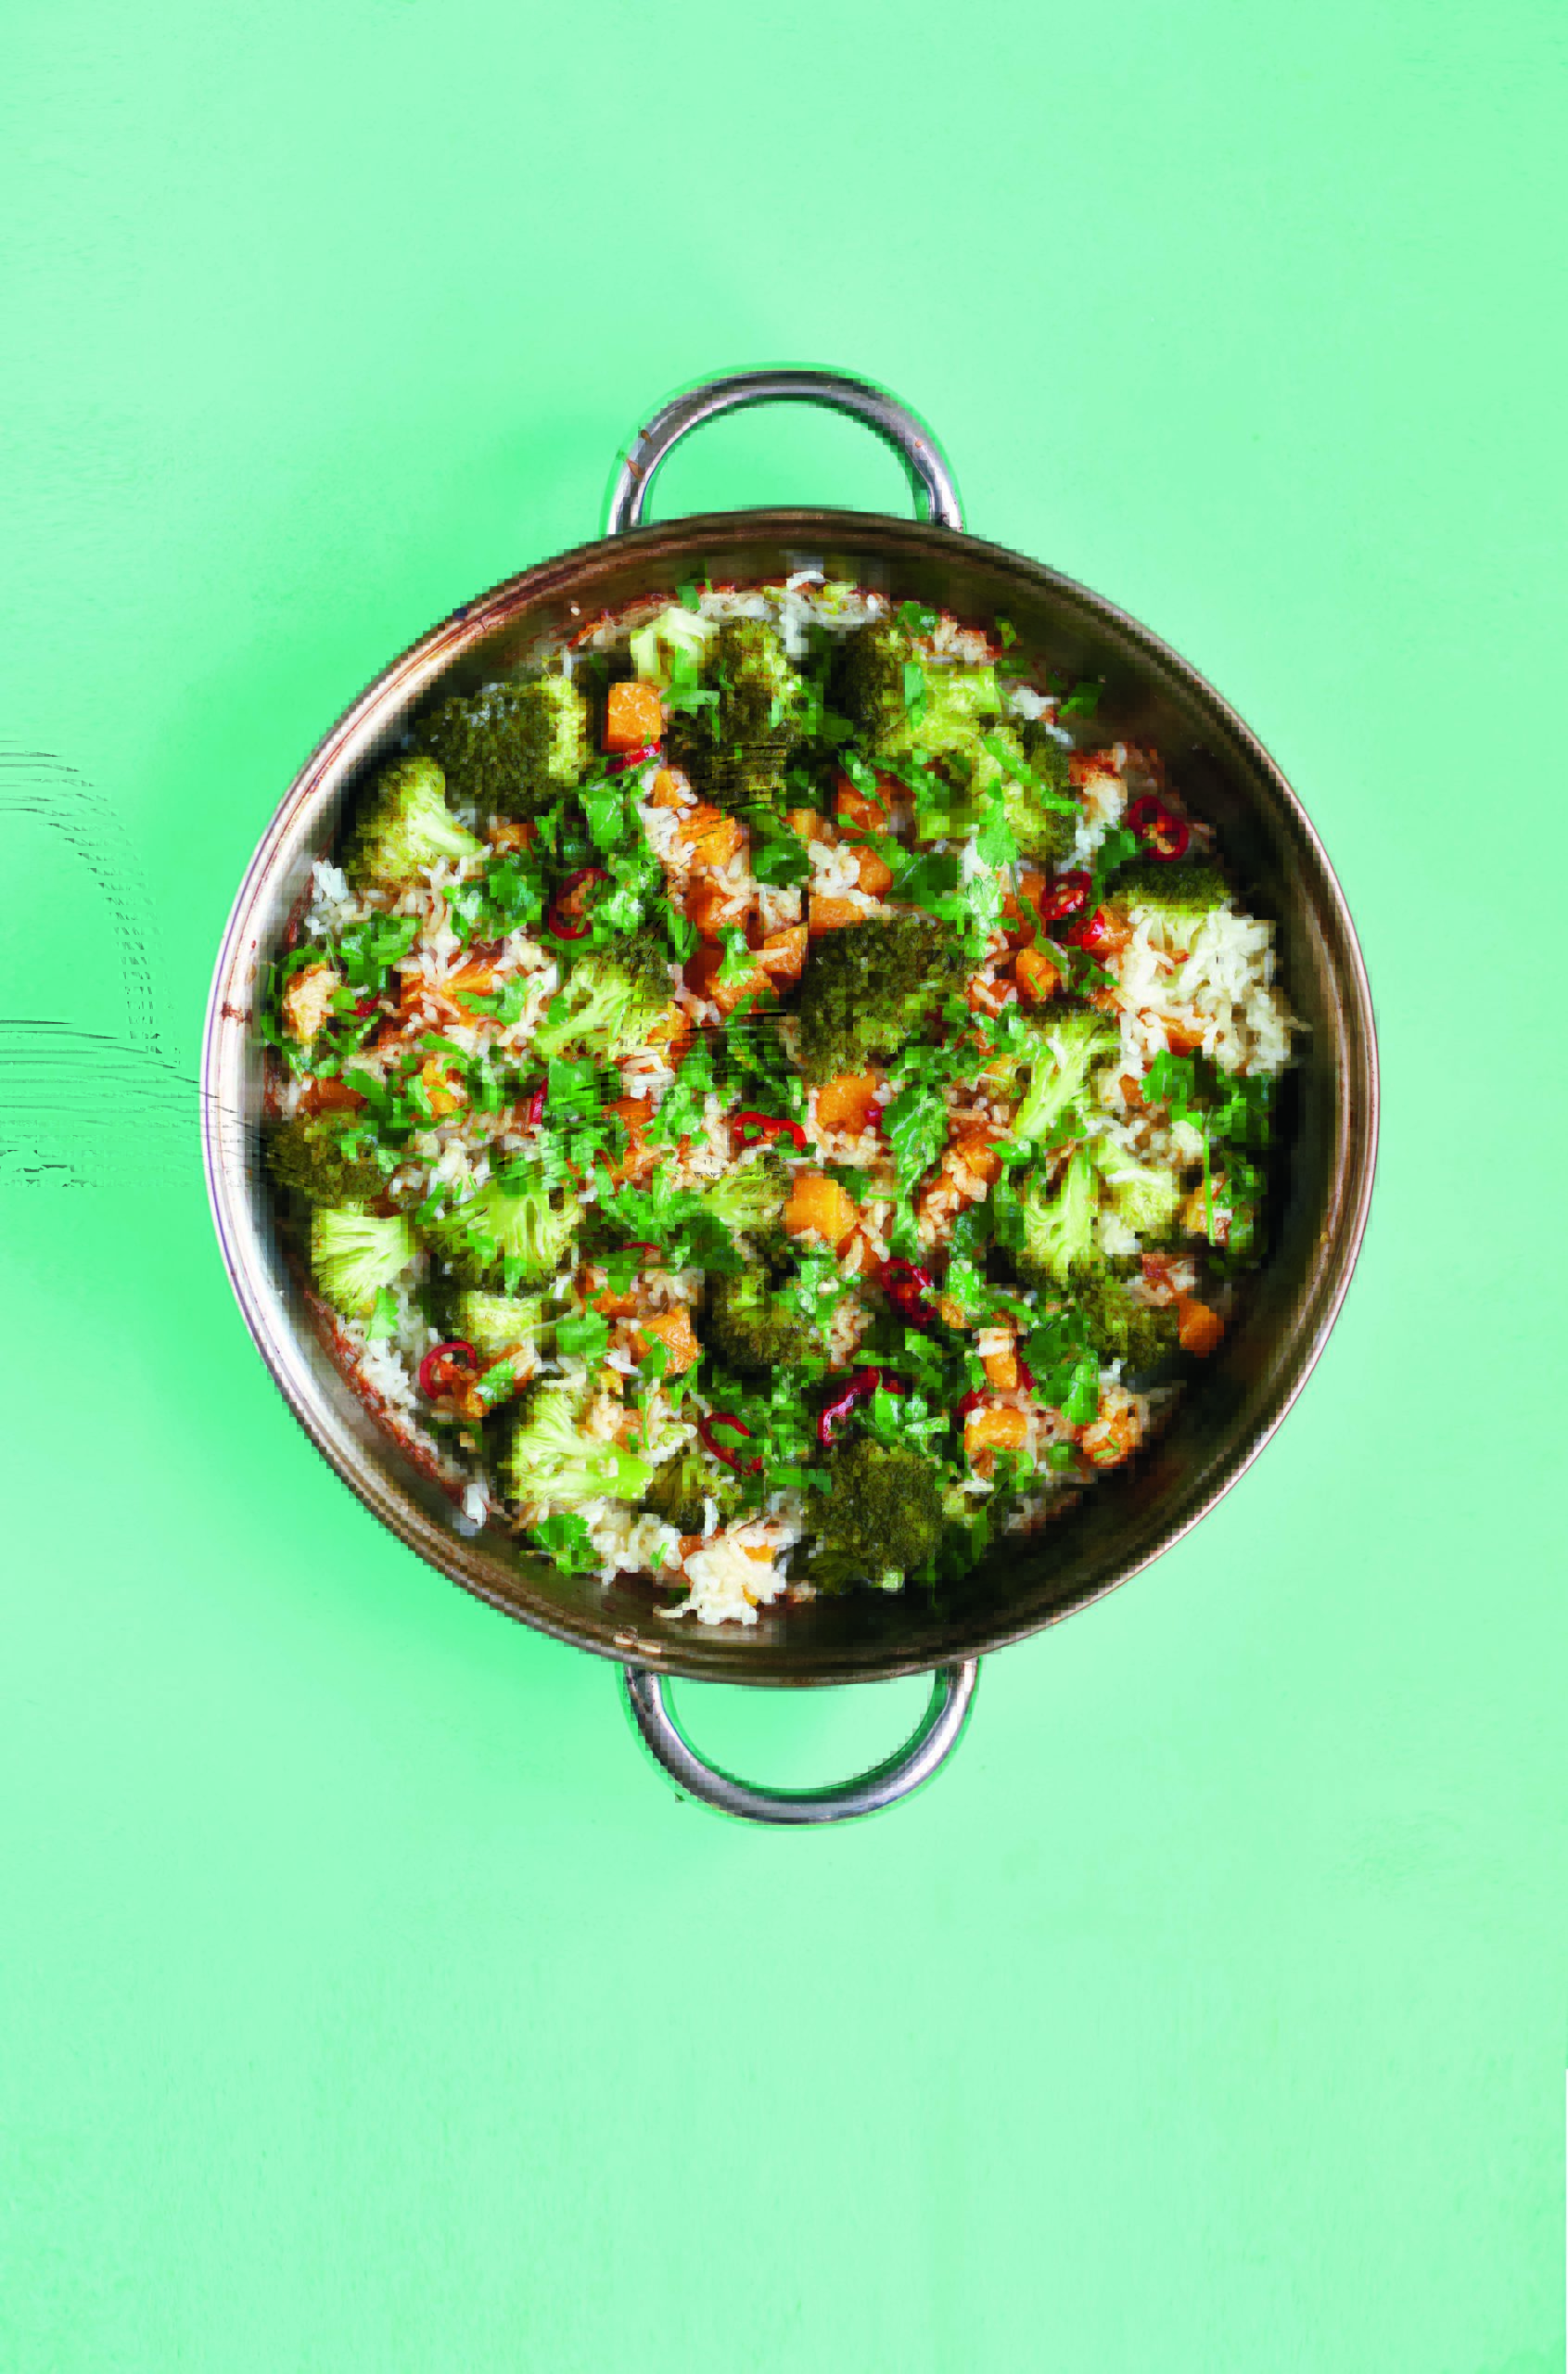 All-In-One Sticky Rice With Broccoli, Squash, Chilli and Ginger